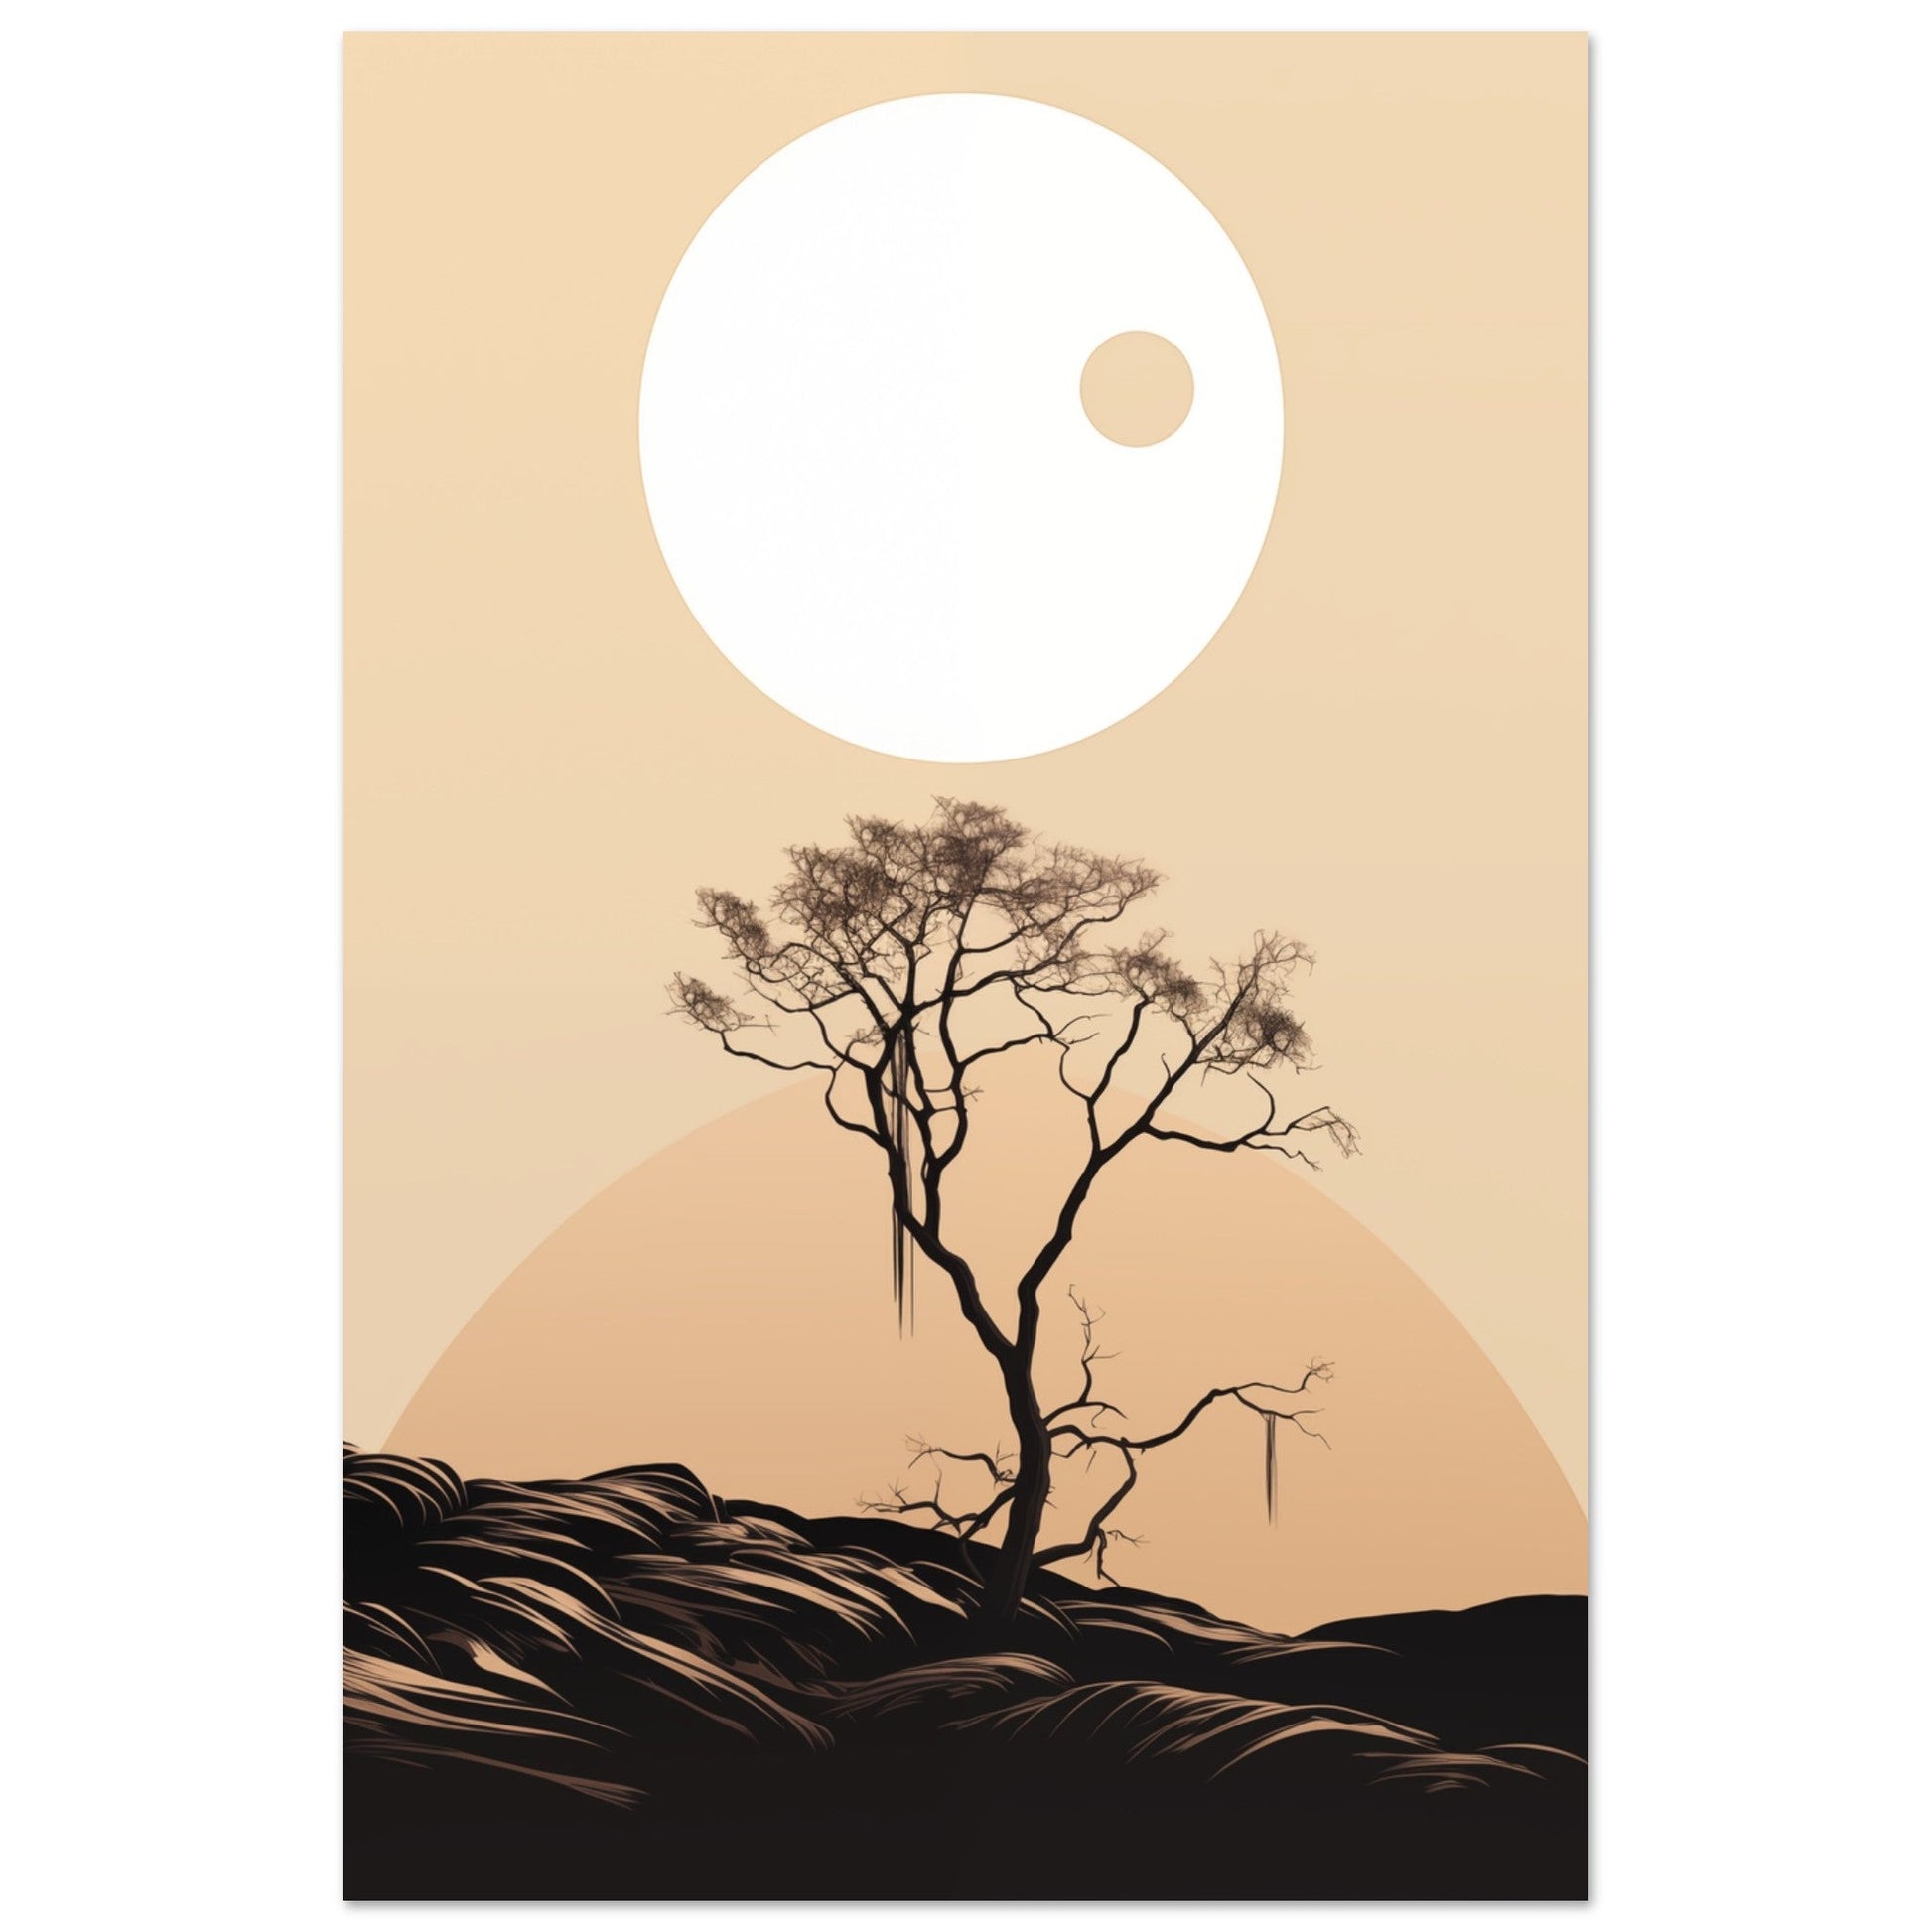 An Eclipse Over Savannah Silence poster featuring a lone tree in the background, perfect for adding visual interest to your room's wall decor.